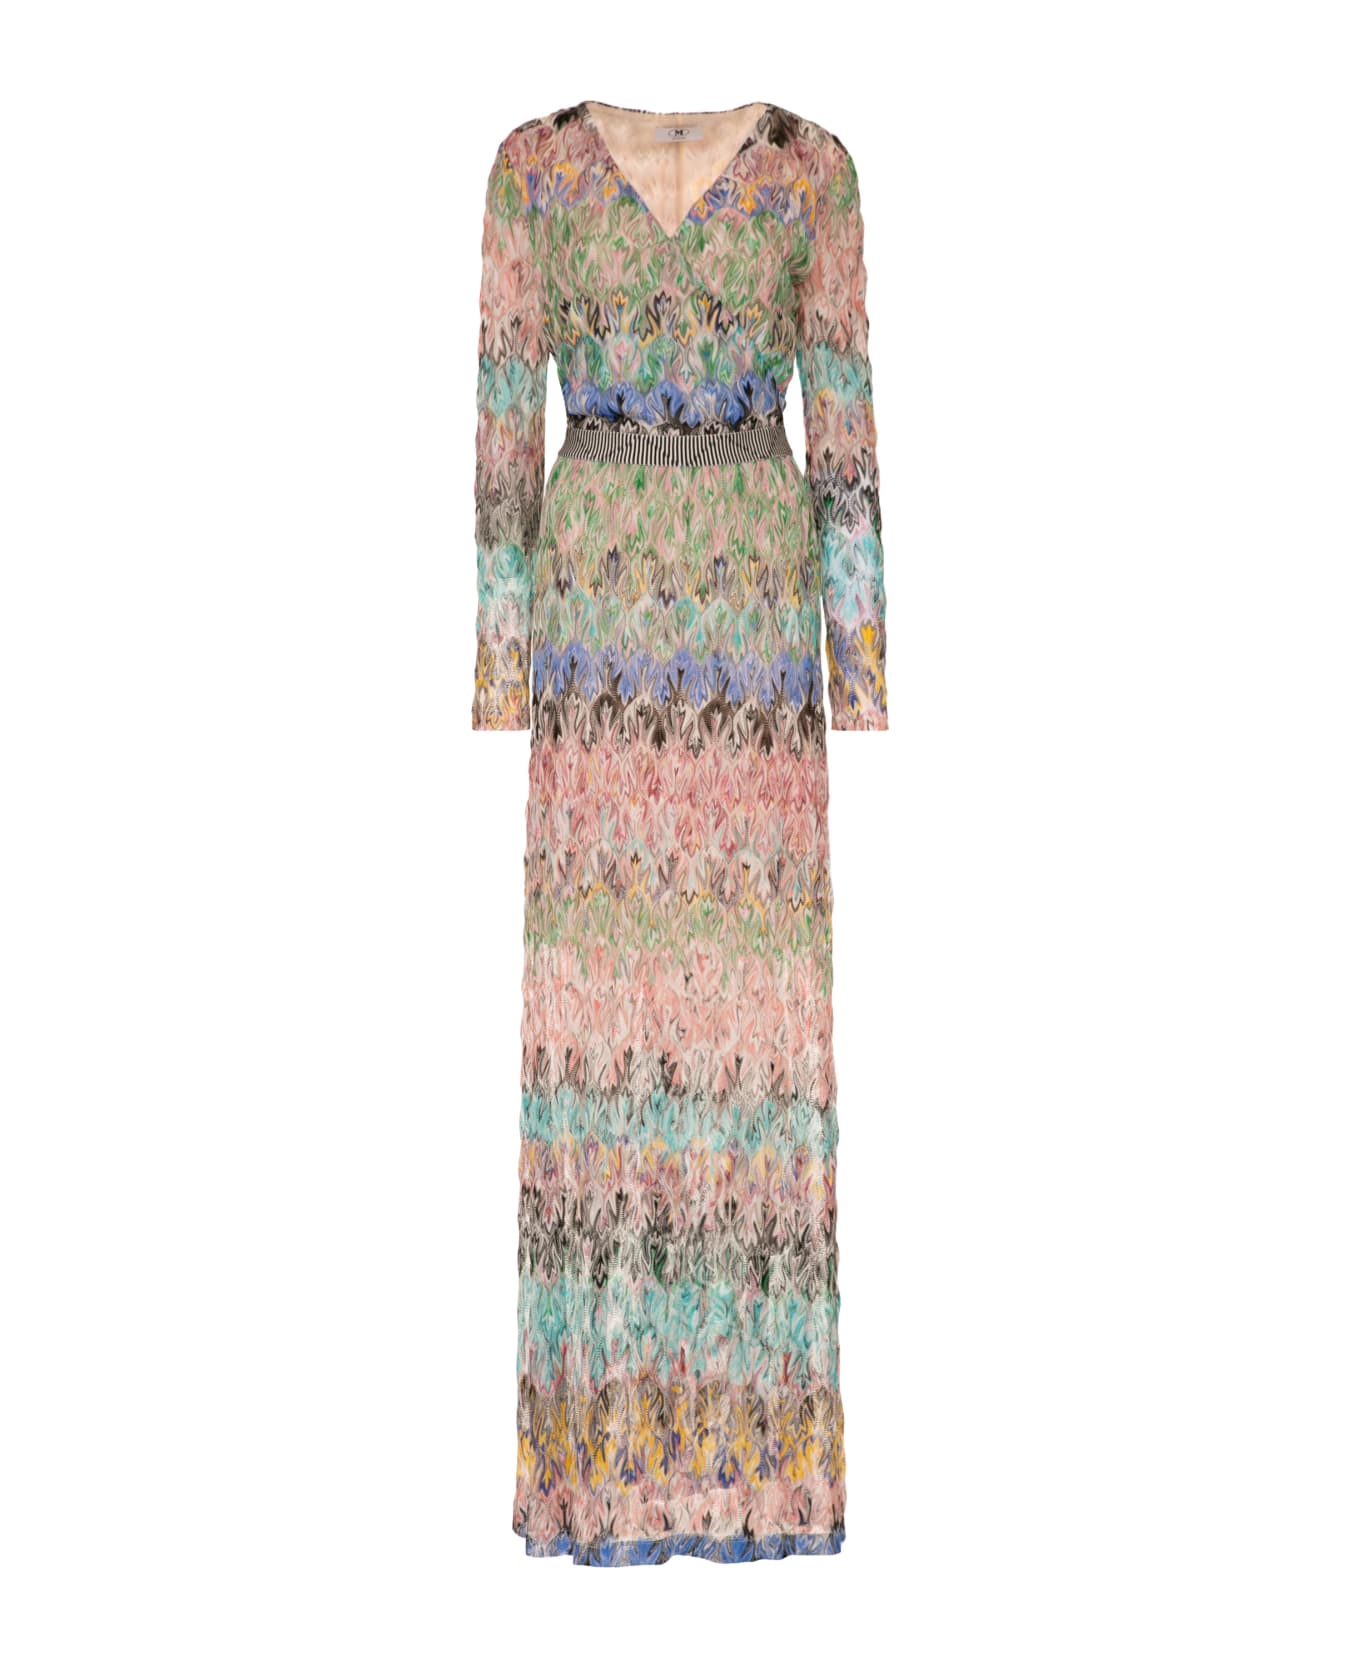 M Missoni Knitted Long Dress - Multicolor